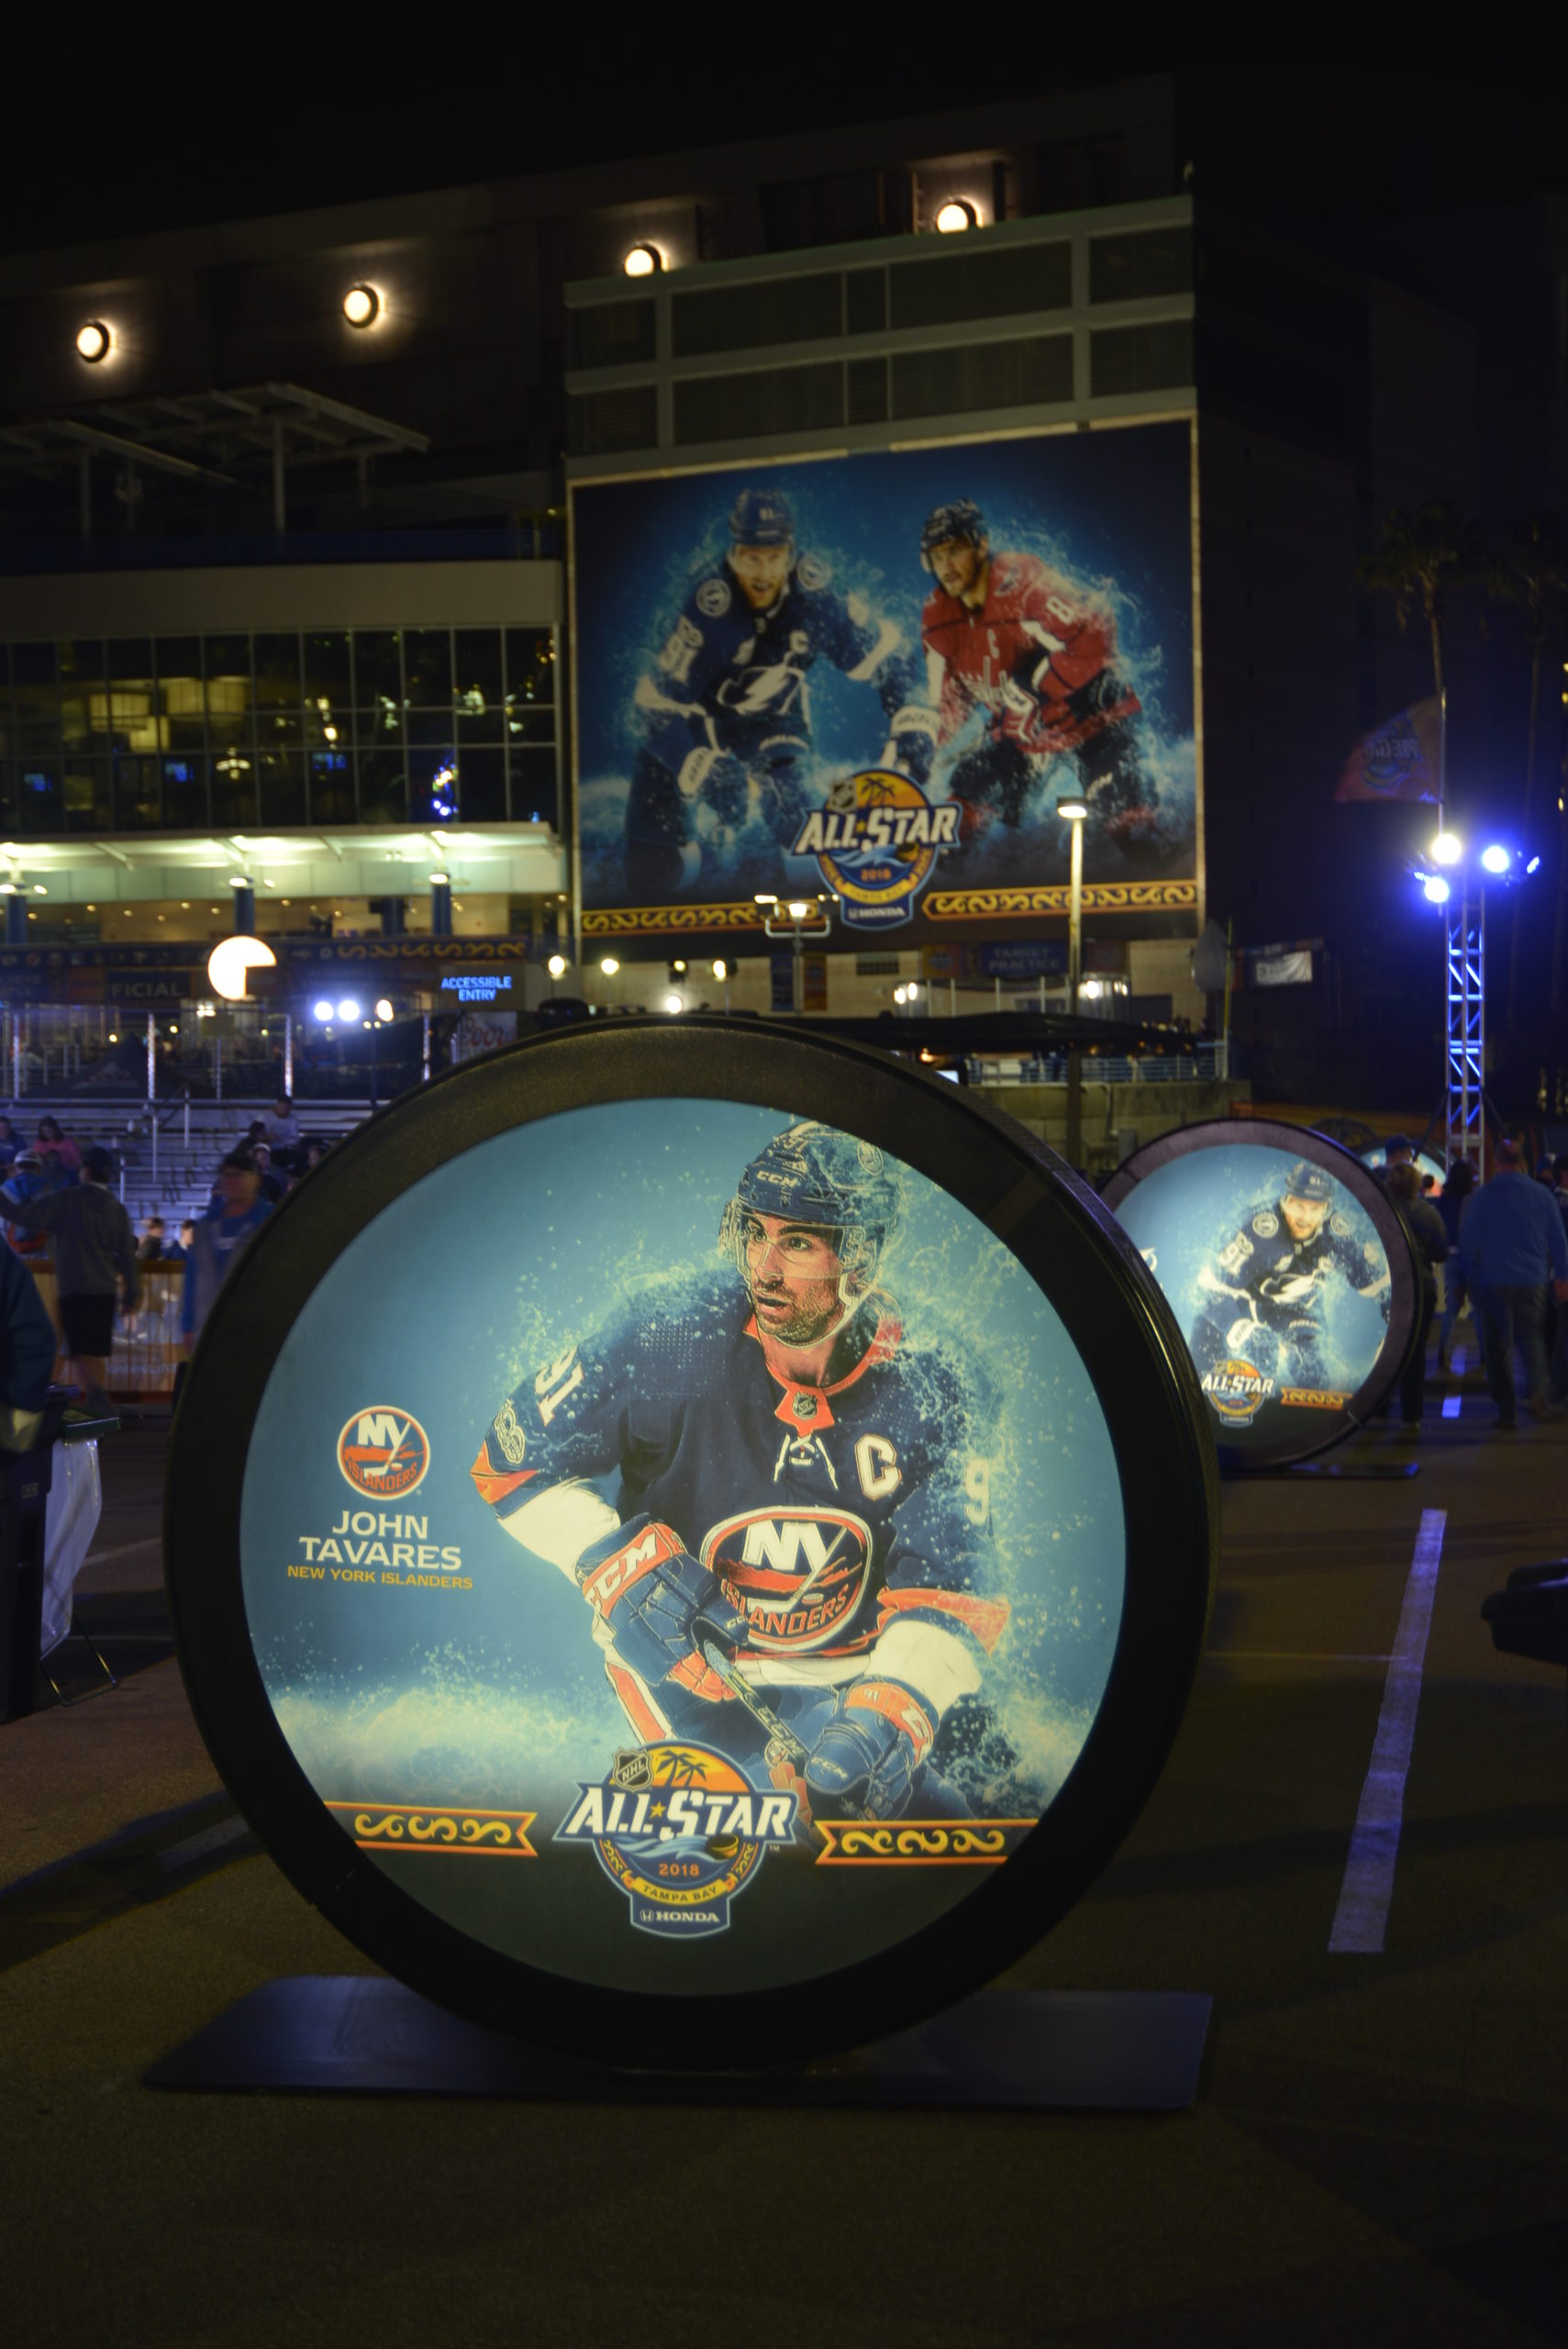 night shot of the light box hockey pucks for the nhl all star game